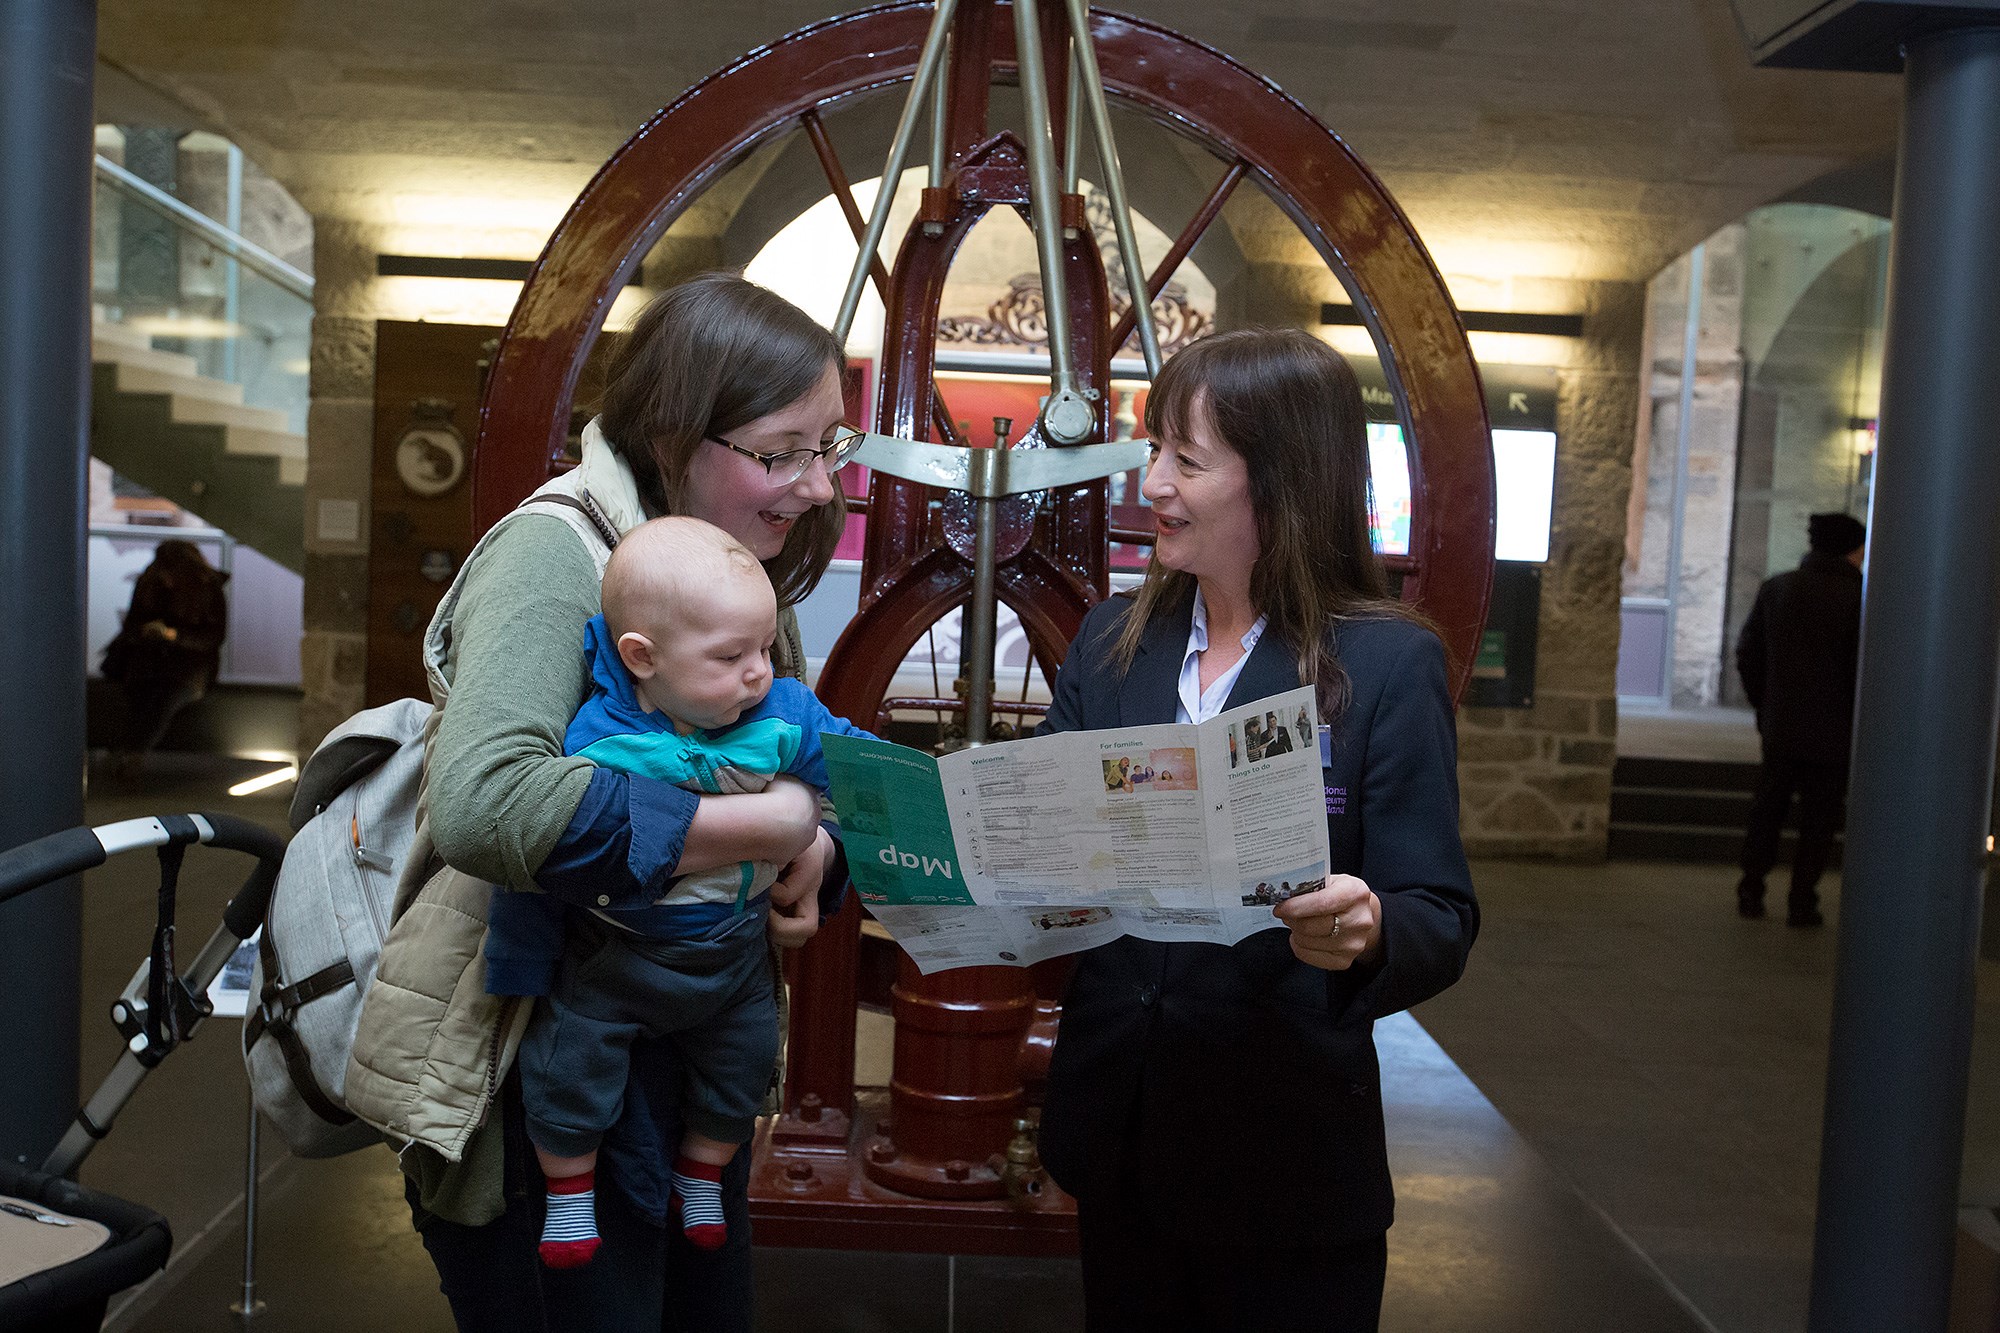 A woman holding a baby looks at a map held by a member of the visitor experience staff.